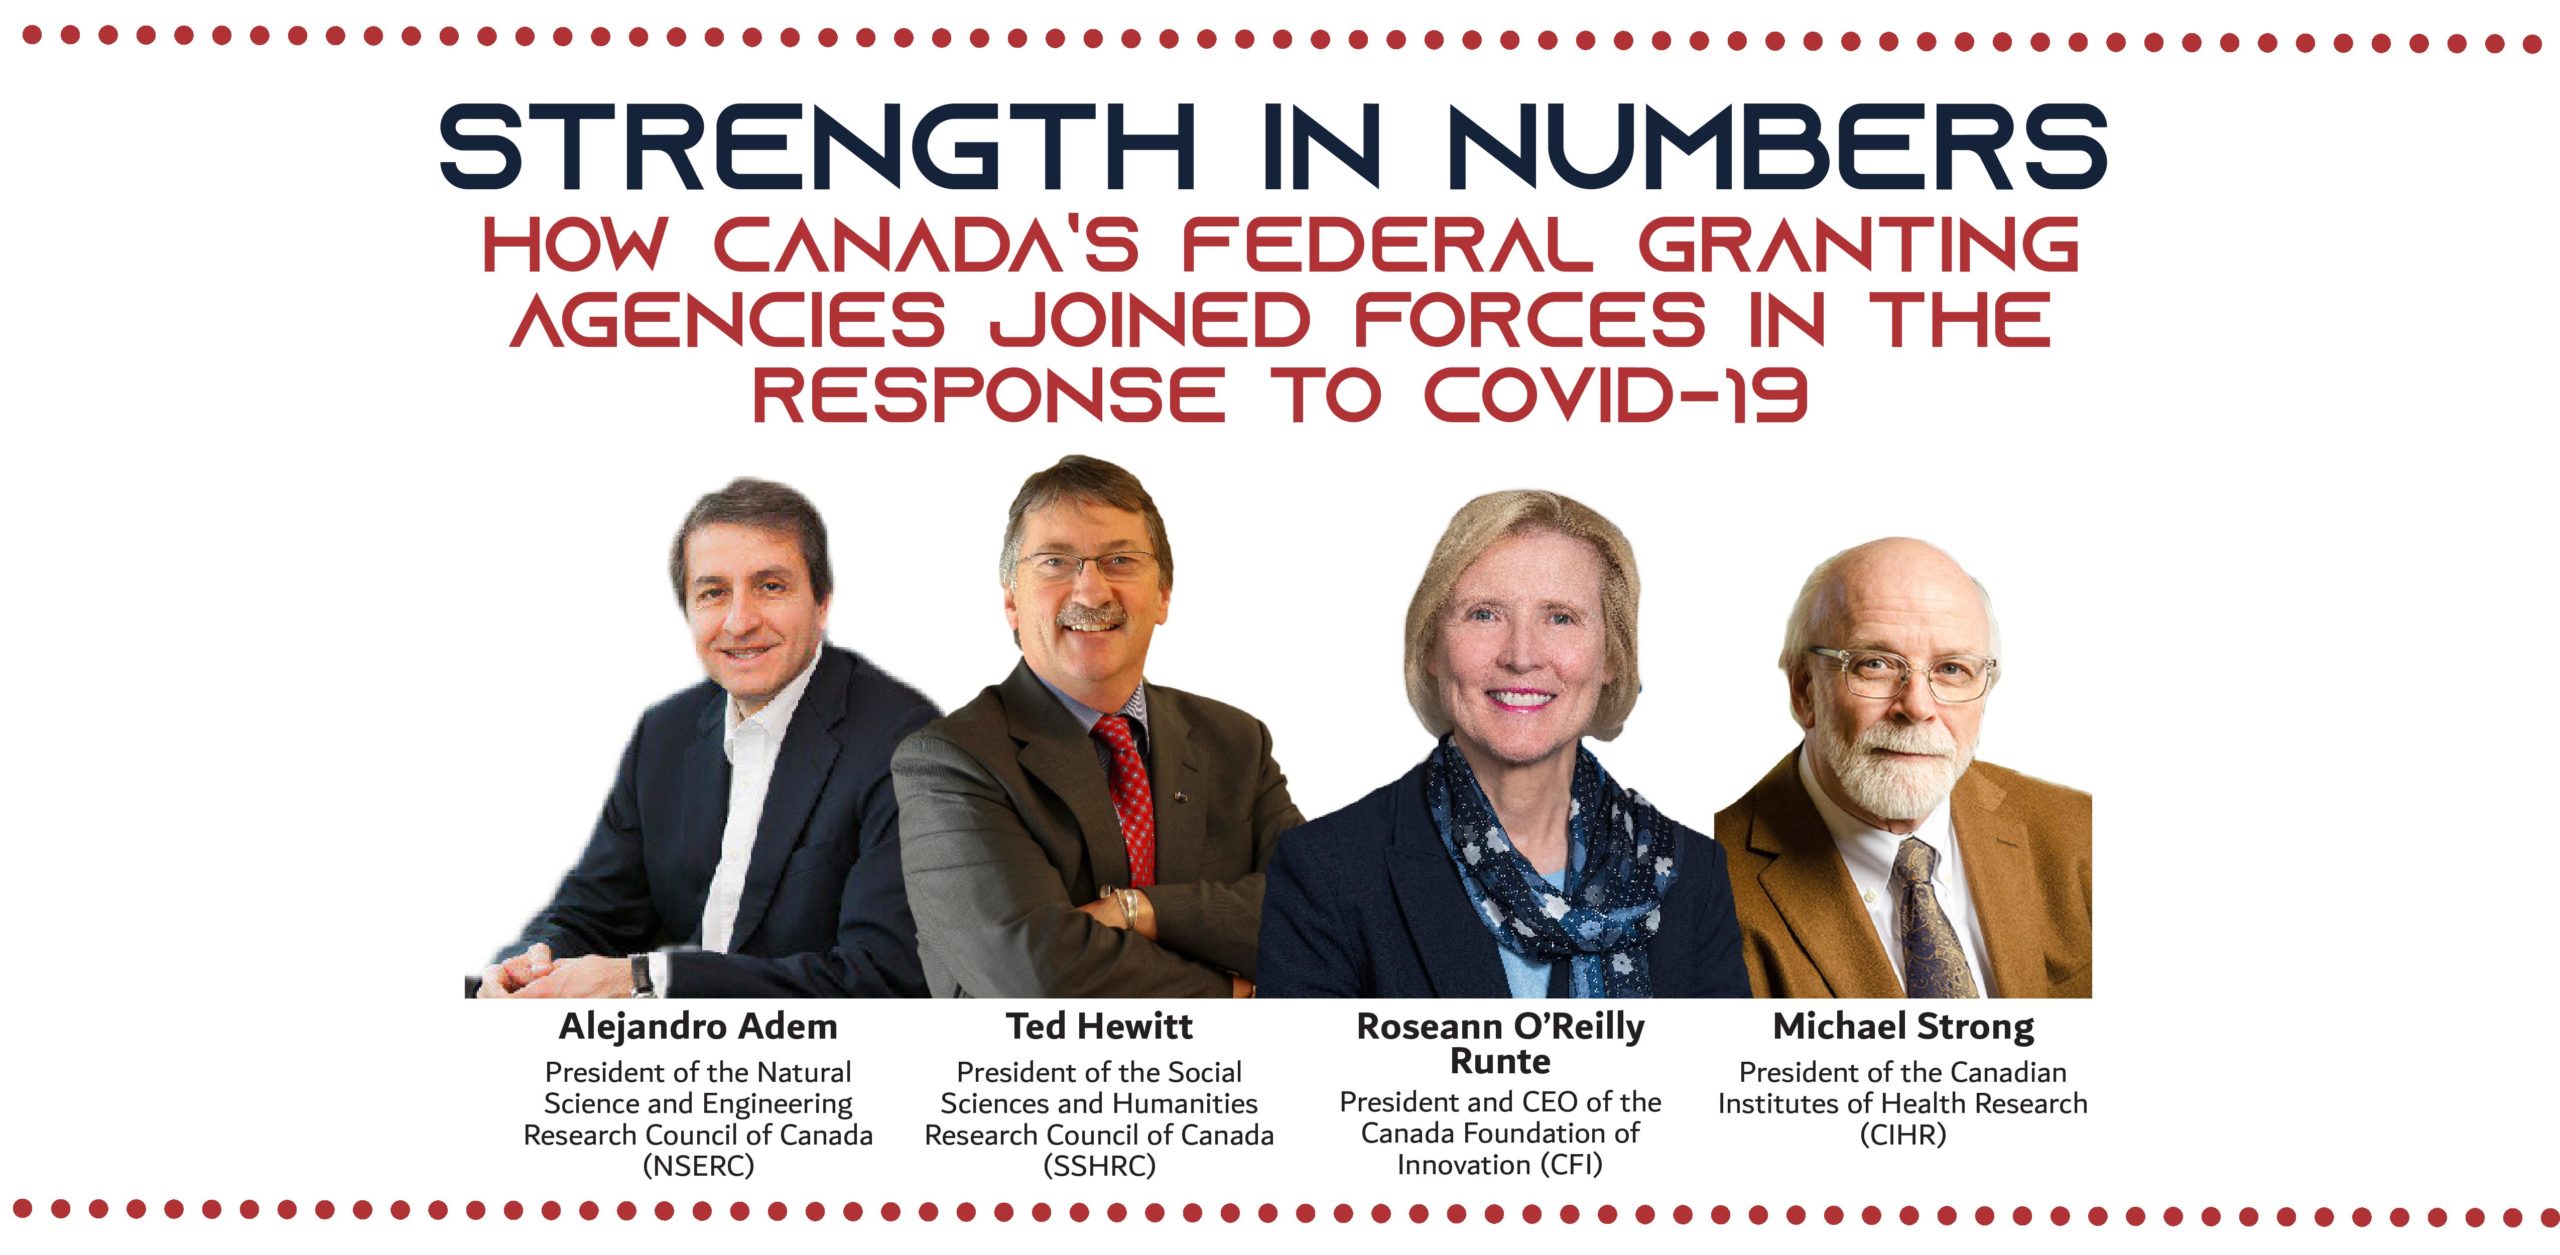 Strength in Numbers How Canada’s federal granting agencies joined forces in the response to COVID-19 Alejandro Adem President of the Natural Science and Engineering Research Council of Canada (NSERC), Ted Hewitt President of the Social Sciences and Humanities Research Council of Canada (SSHRC), Dr. Roseann O’Reilly Runte President and CEO of the Canada Foundation of Innovation (CFI), Michael Strong President of the Canadian Institutes of Health Research (CIHR)